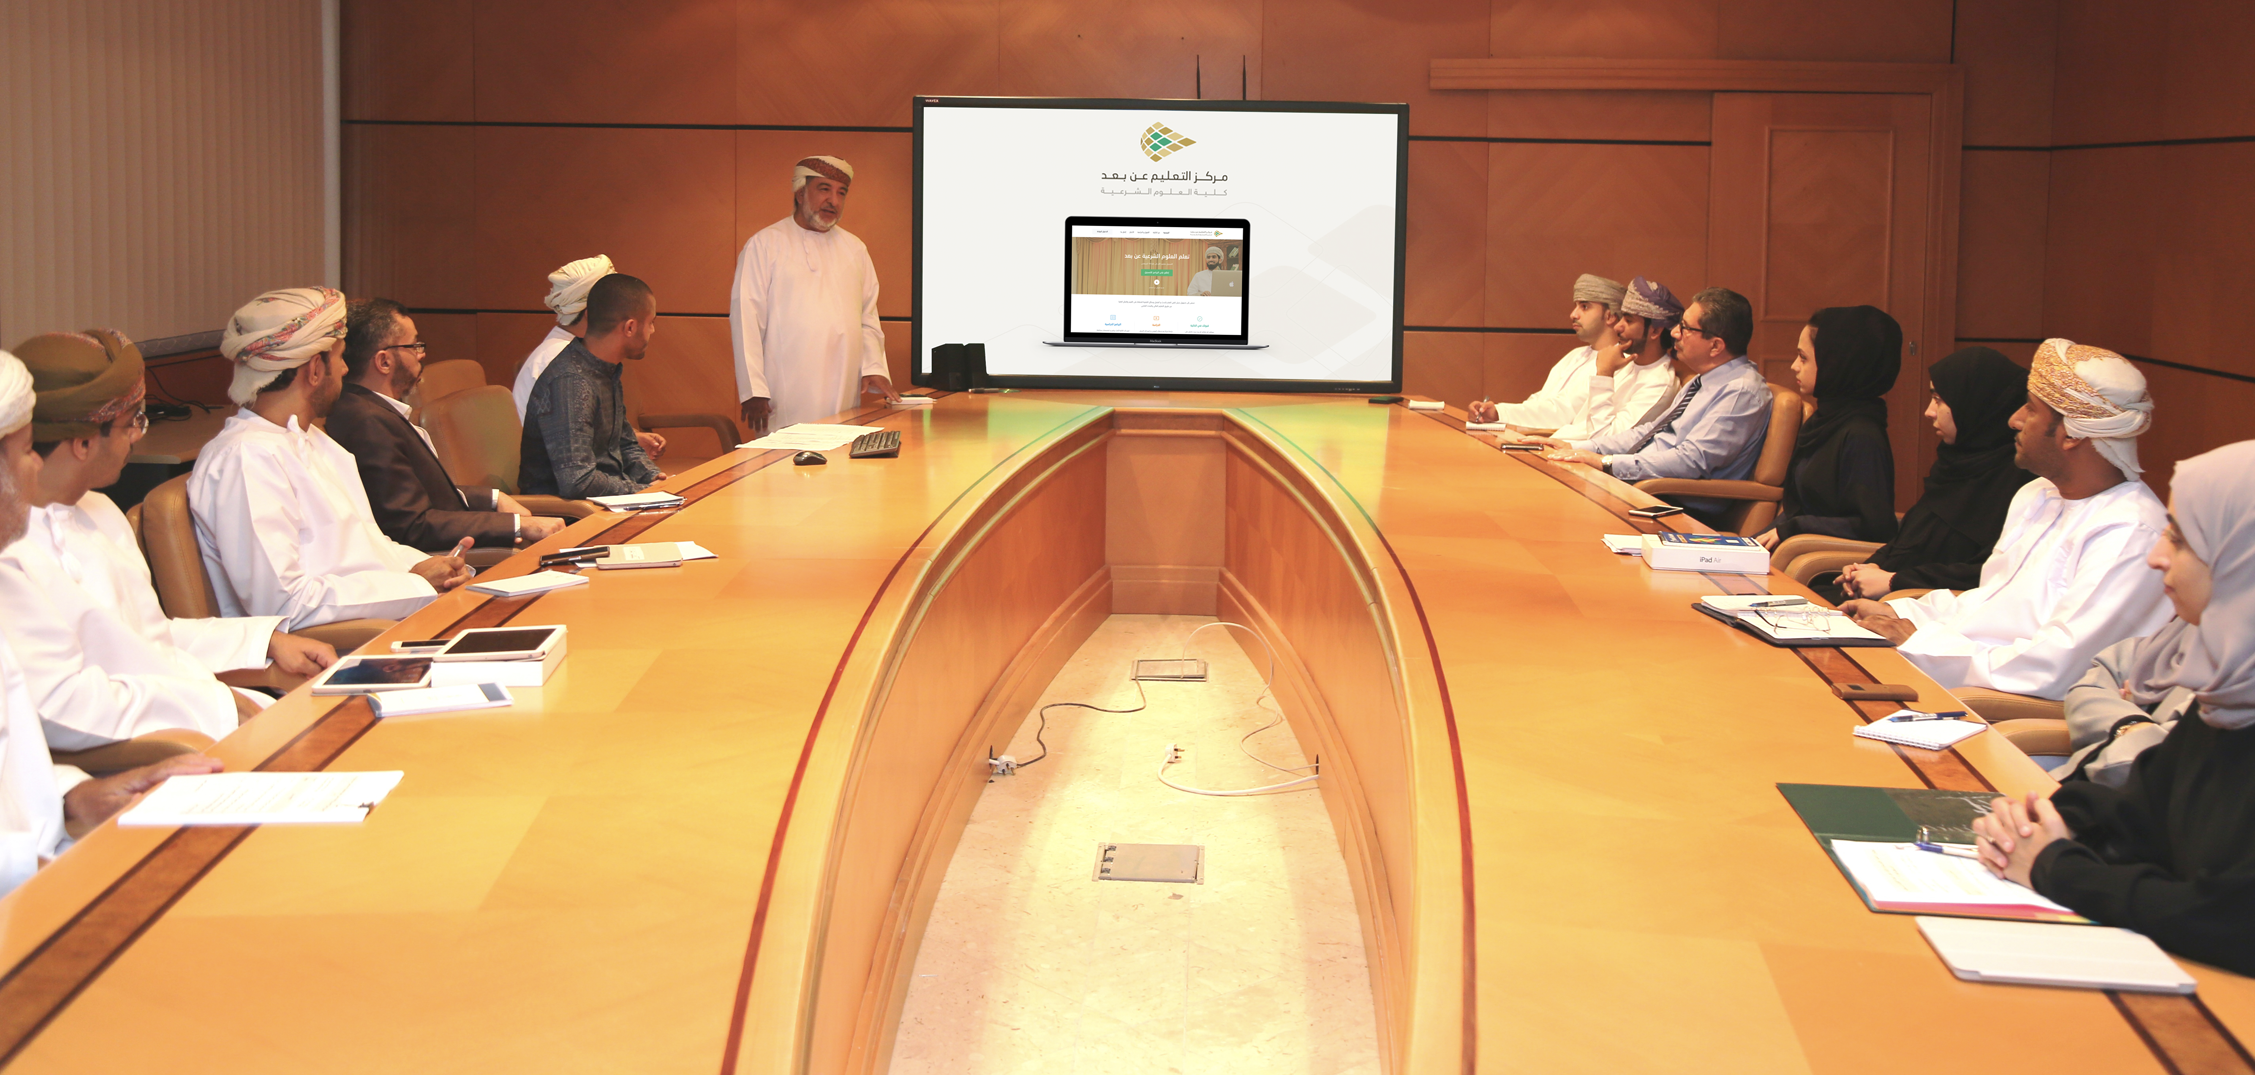 The Secretariat General of the Education Council got informed of the practice of &amp;amp;amp;quot;Distance Learning of Sharia Sciences&amp;amp;amp;quot;